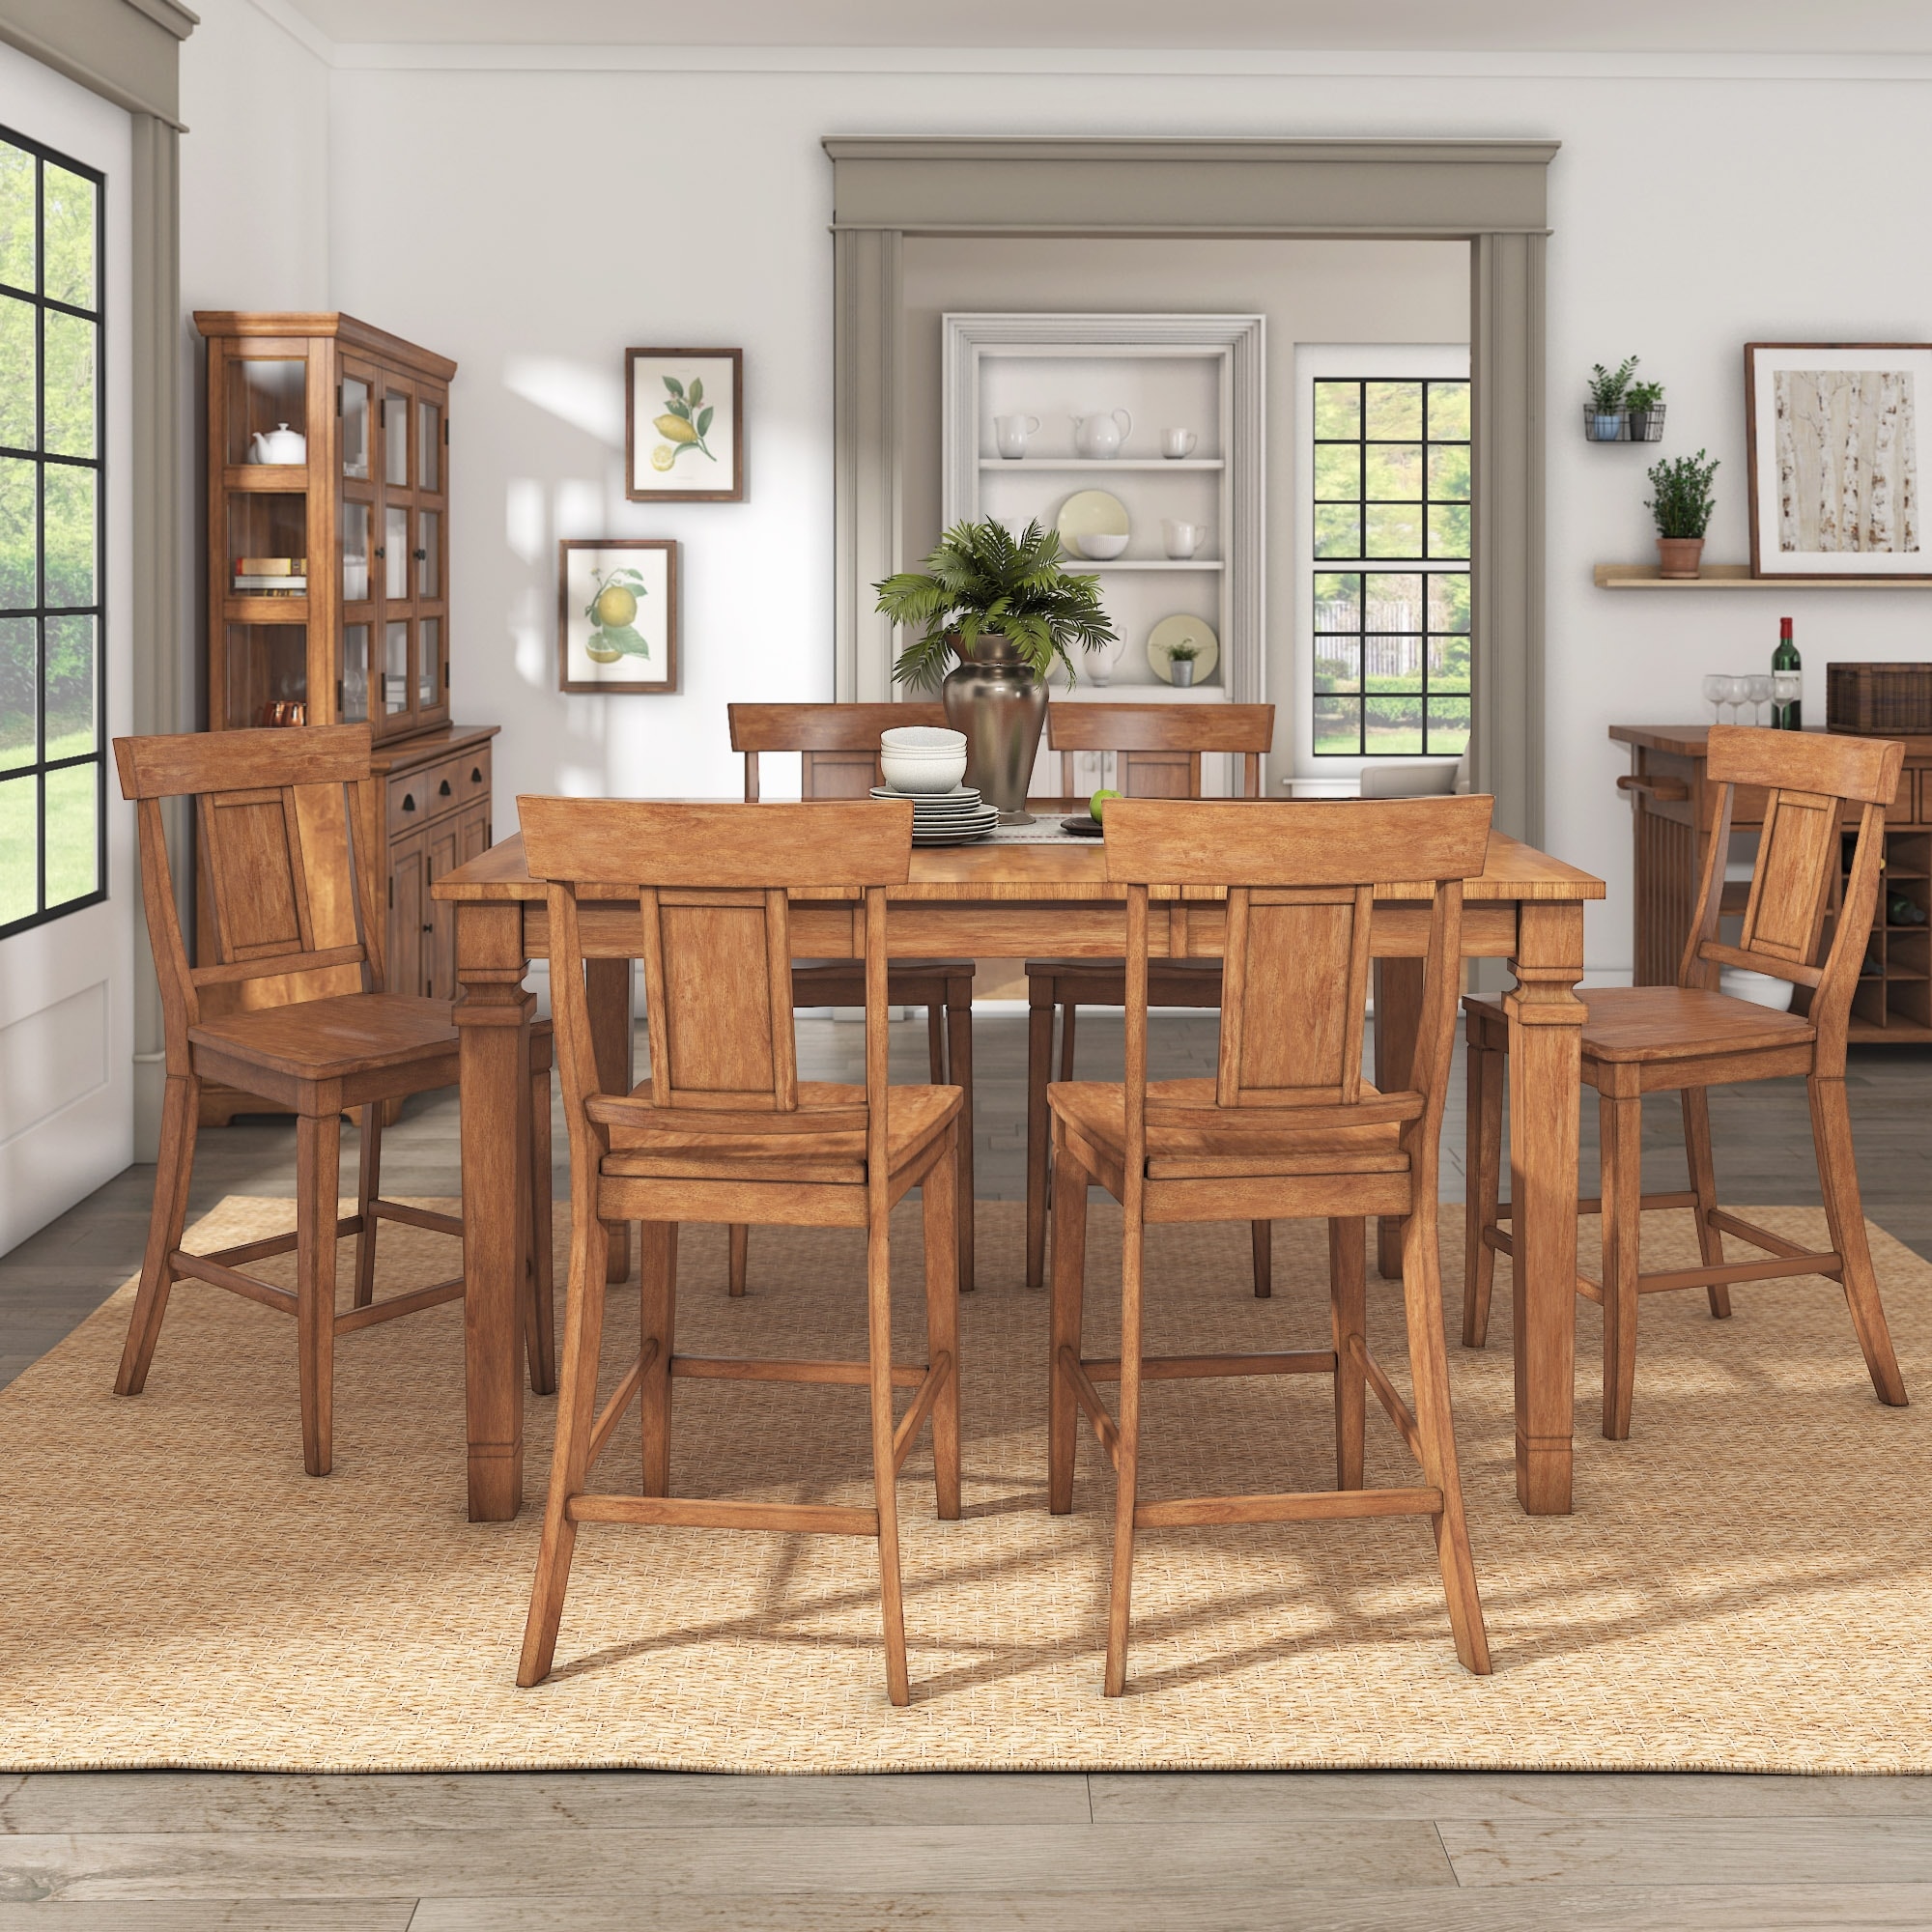 iNSPIRE Q Elena Oak Extendable Counter Height Dining Set with Panel Back Chairs by  Classic